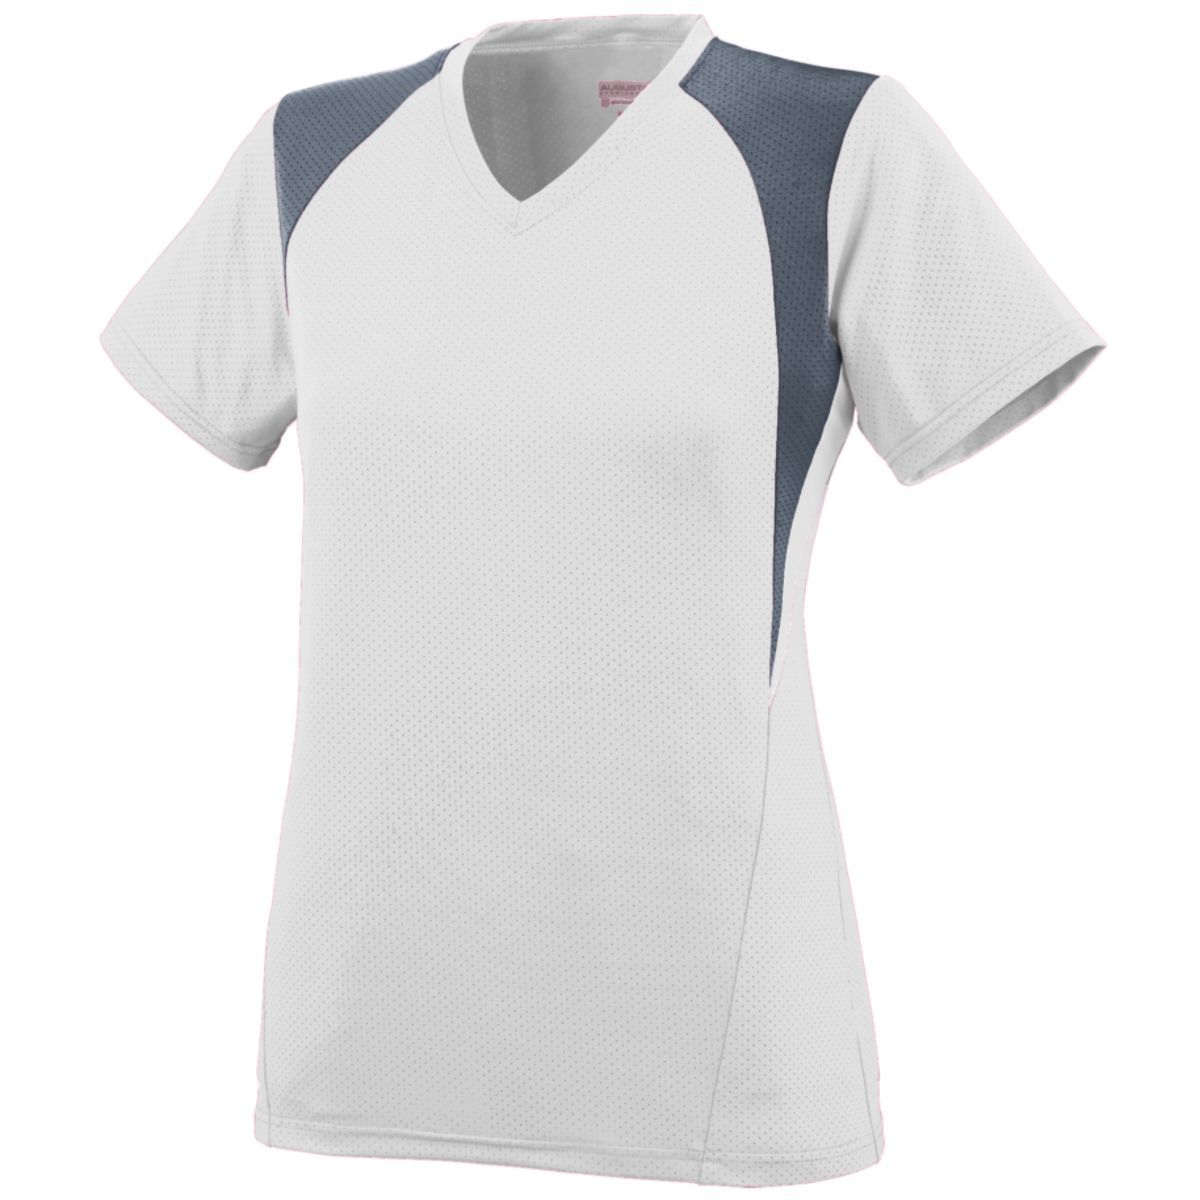 Augusta Sportswear Ladies Mystic Jersey in White/Graphite/White  -Part of the Ladies, Ladies-Jersey, Augusta-Products, Soccer, Shirts, All-Sports-1 product lines at KanaleyCreations.com